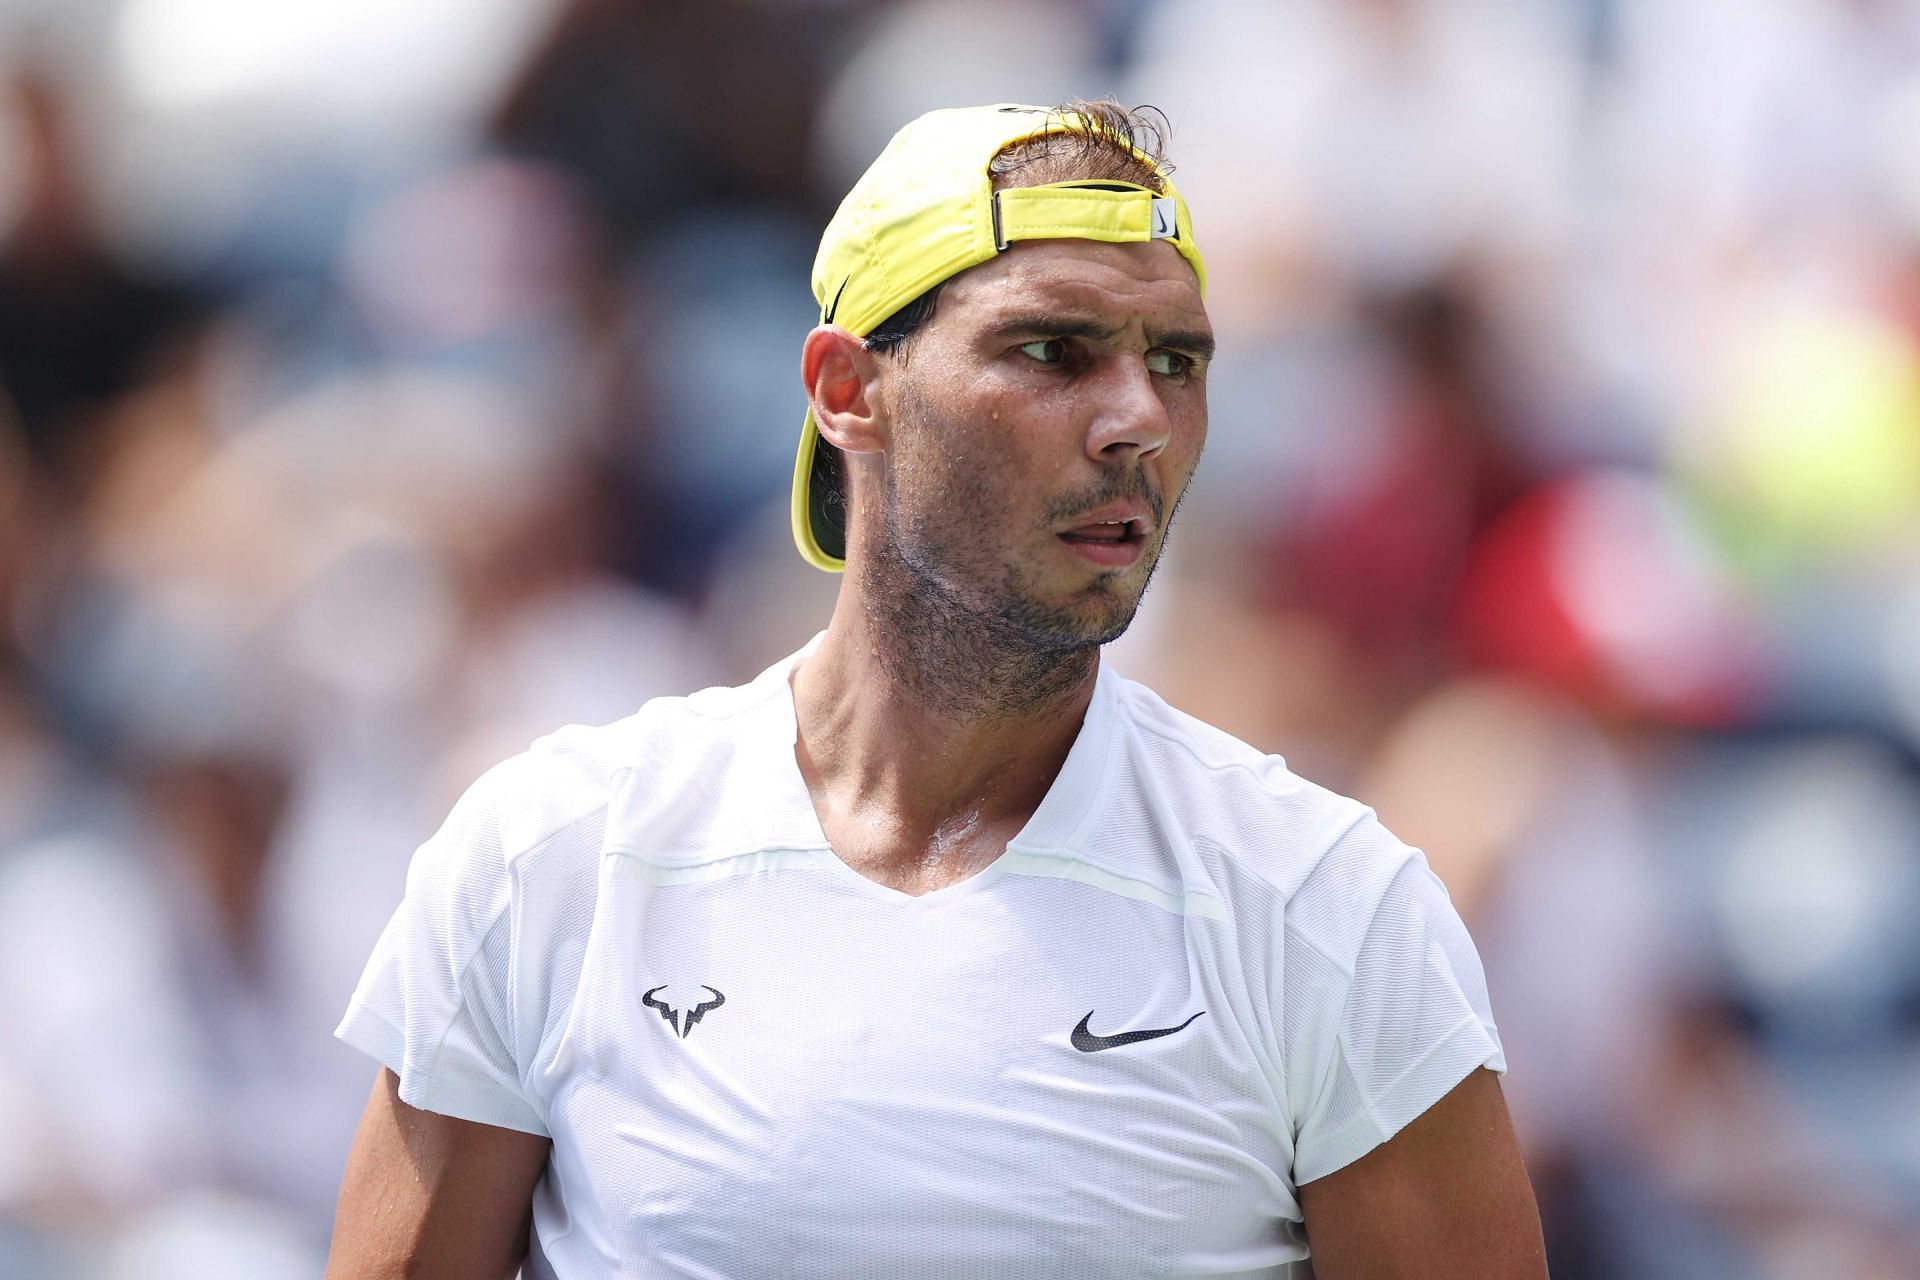 Rafael Nadal withdraws from the 2023 Roland Garros